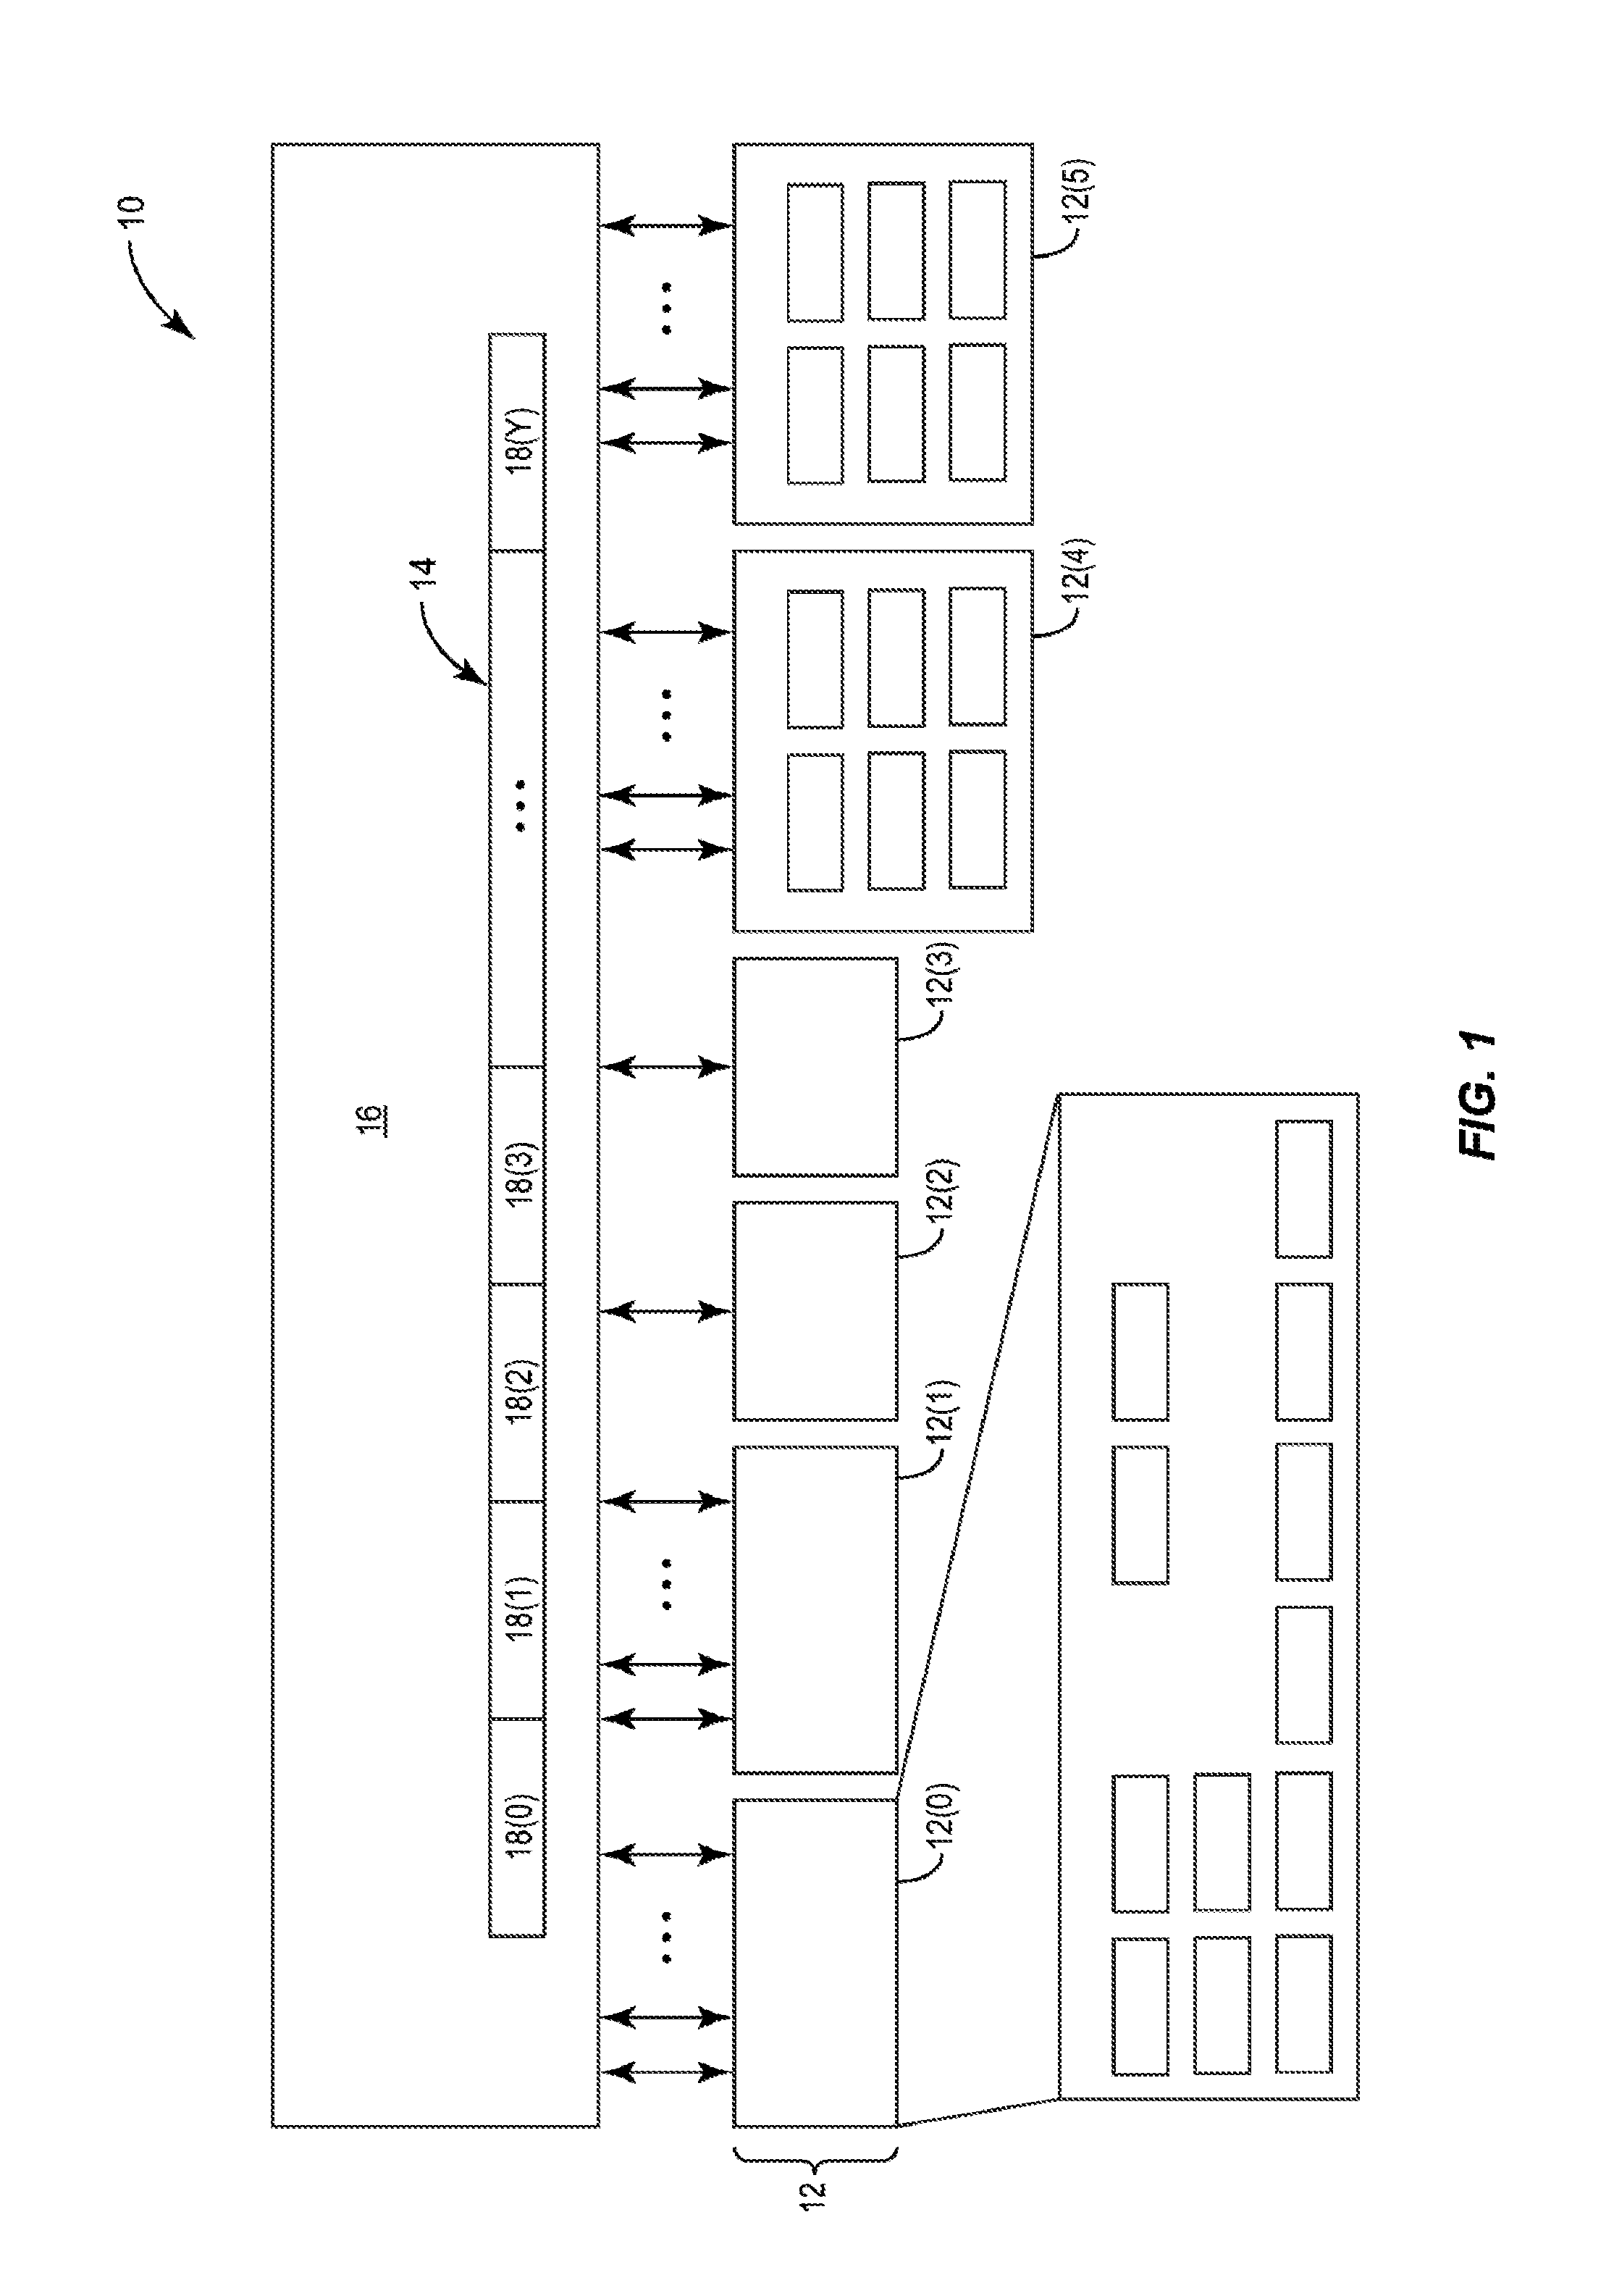 VECTOR PROCESSING ENGINES (VPEs) EMPLOYING REORDERING CIRCUITRY IN DATA FLOW PATHS BETWEEN EXECUTION UNITS AND VECTOR DATA MEMORY TO PROVIDE IN-FLIGHT REORDERING OF OUTPUT VECTOR DATA STORED TO VECTOR DATA MEMORY, AND RELATED VECTOR PROCESSOR SYSTEMS AND METHODS